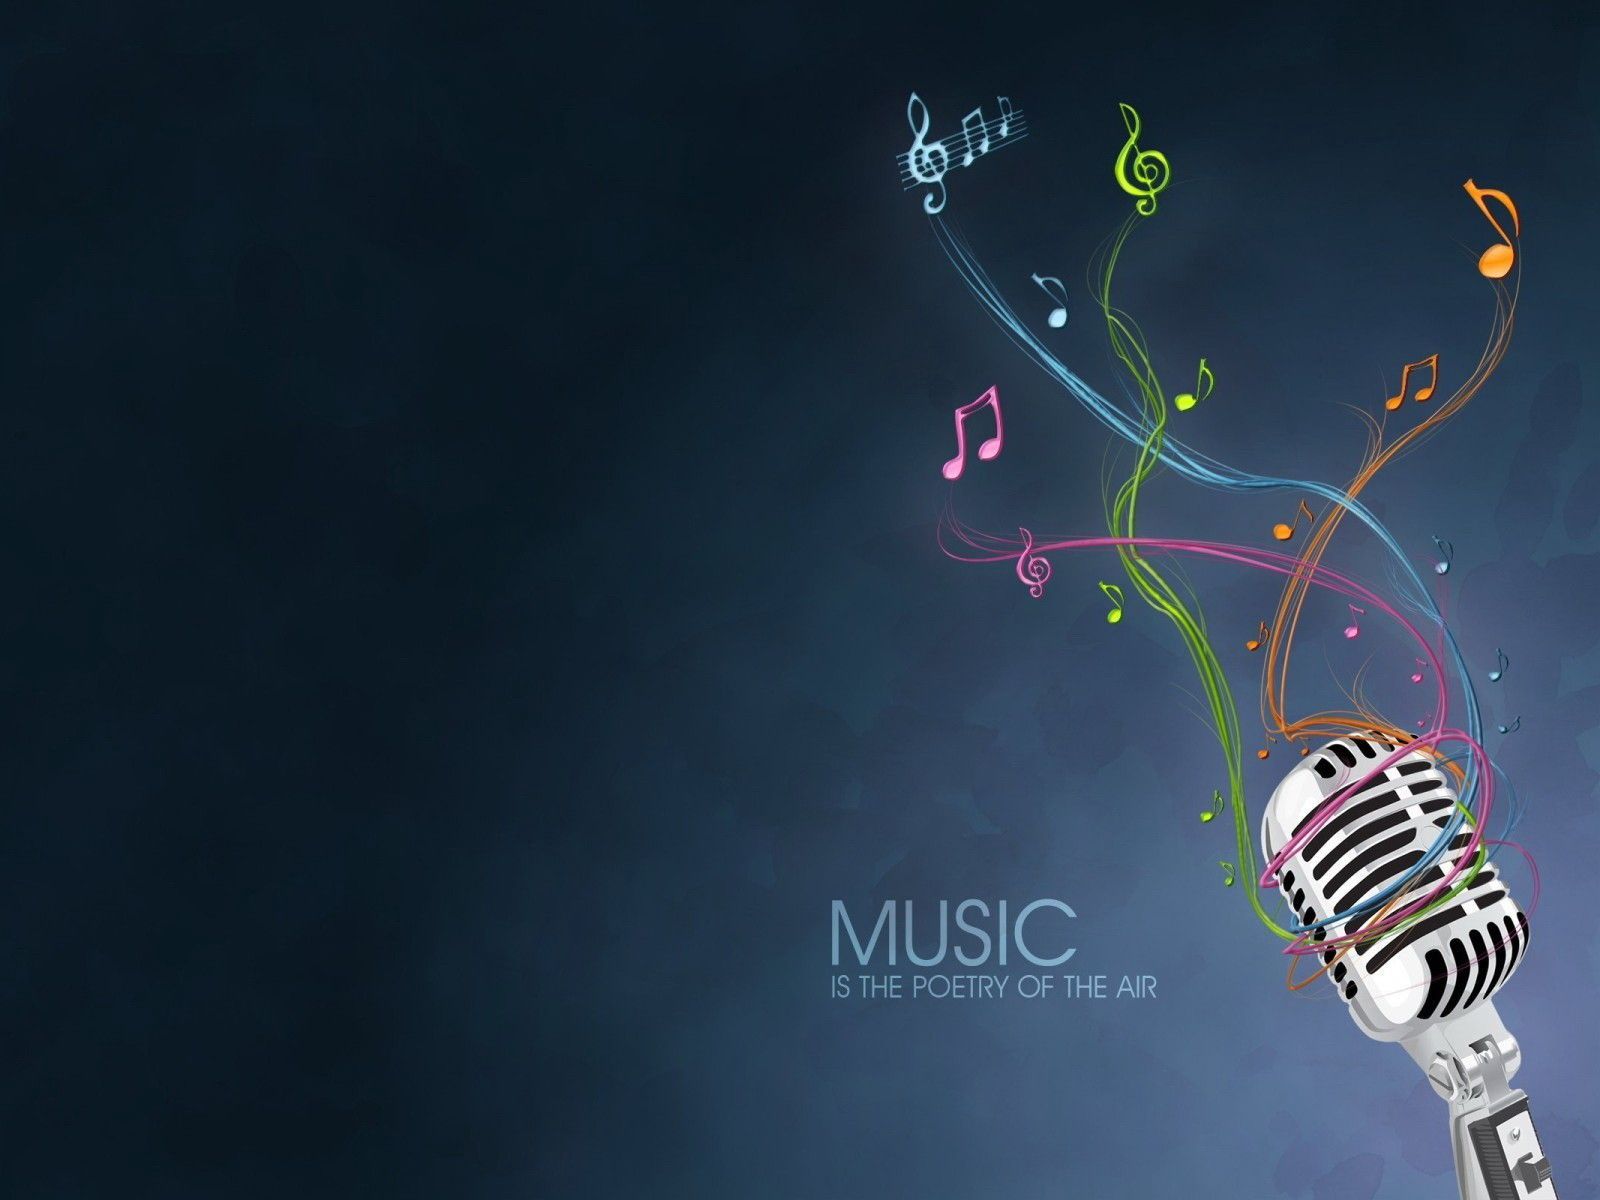 Abstract Music Wallpaper Wallpaper. Music wallpaper, Music picture, Music background